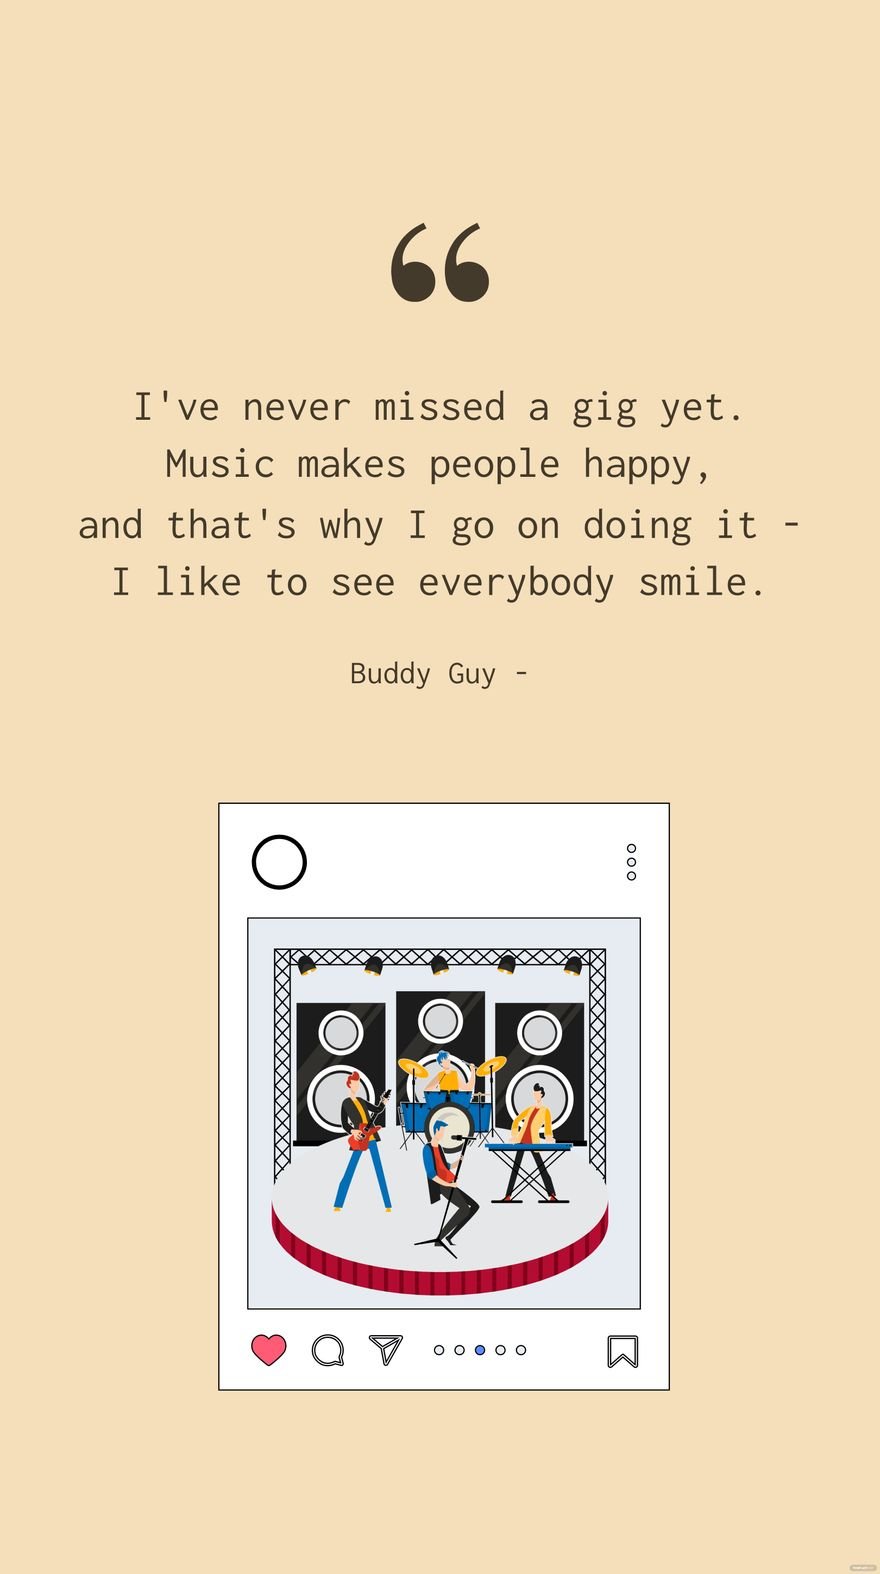 Buddy Guy - I've never missed a gig yet. Music makes people happy, and that's why I go on doing it - I like to see everybody smile. Template